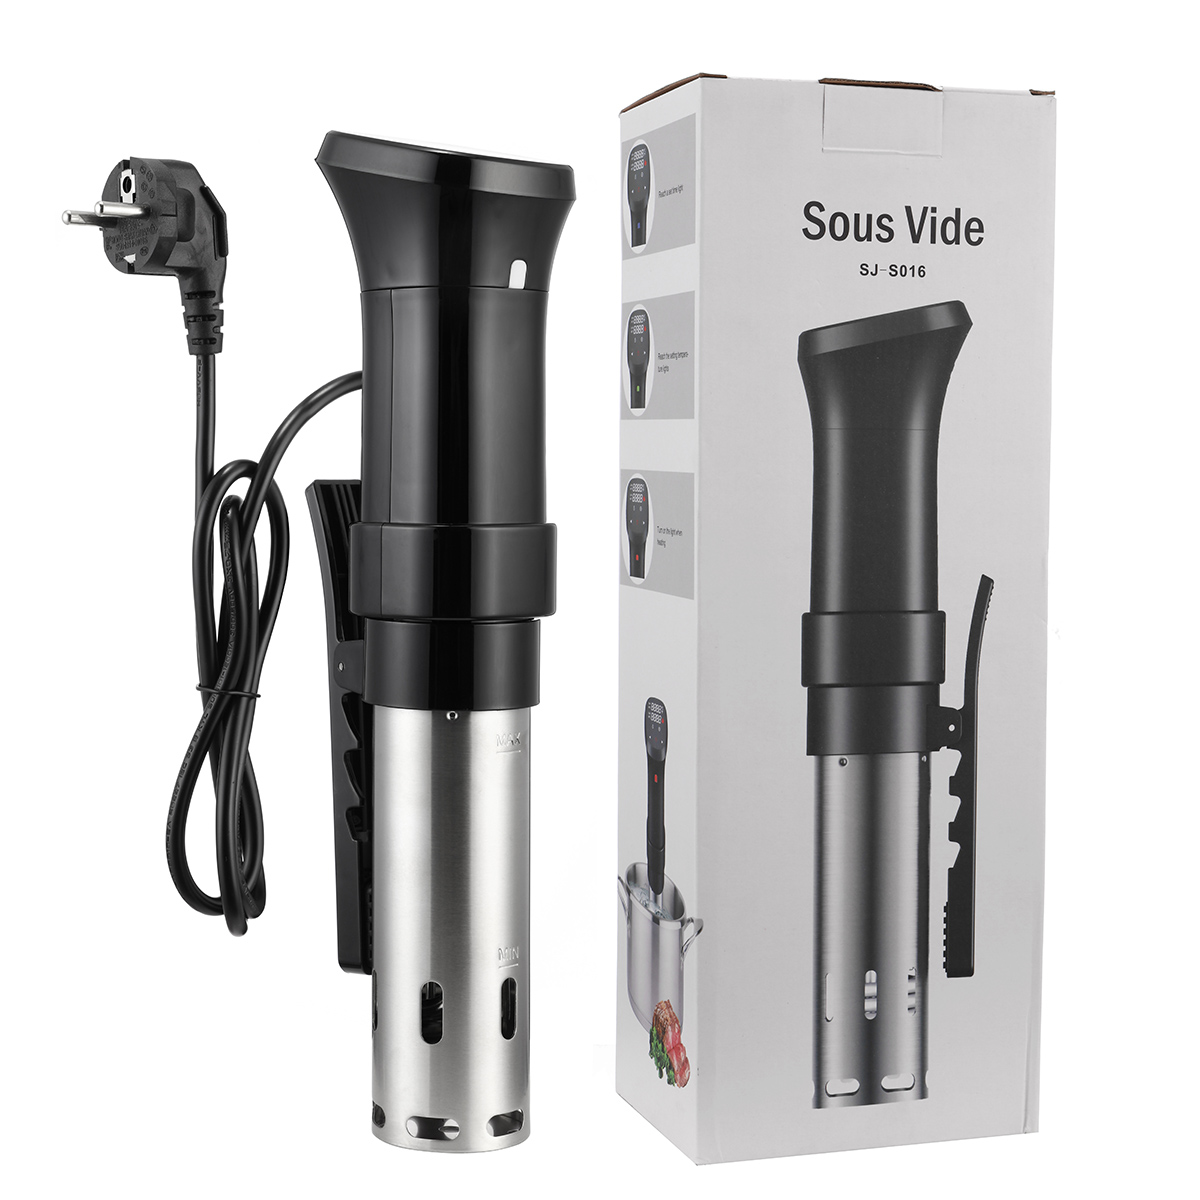 1800W Sous Vide Cooker Thermal Immersion Circulator Machine with Large Digital LCD Display Time and Temperature Control